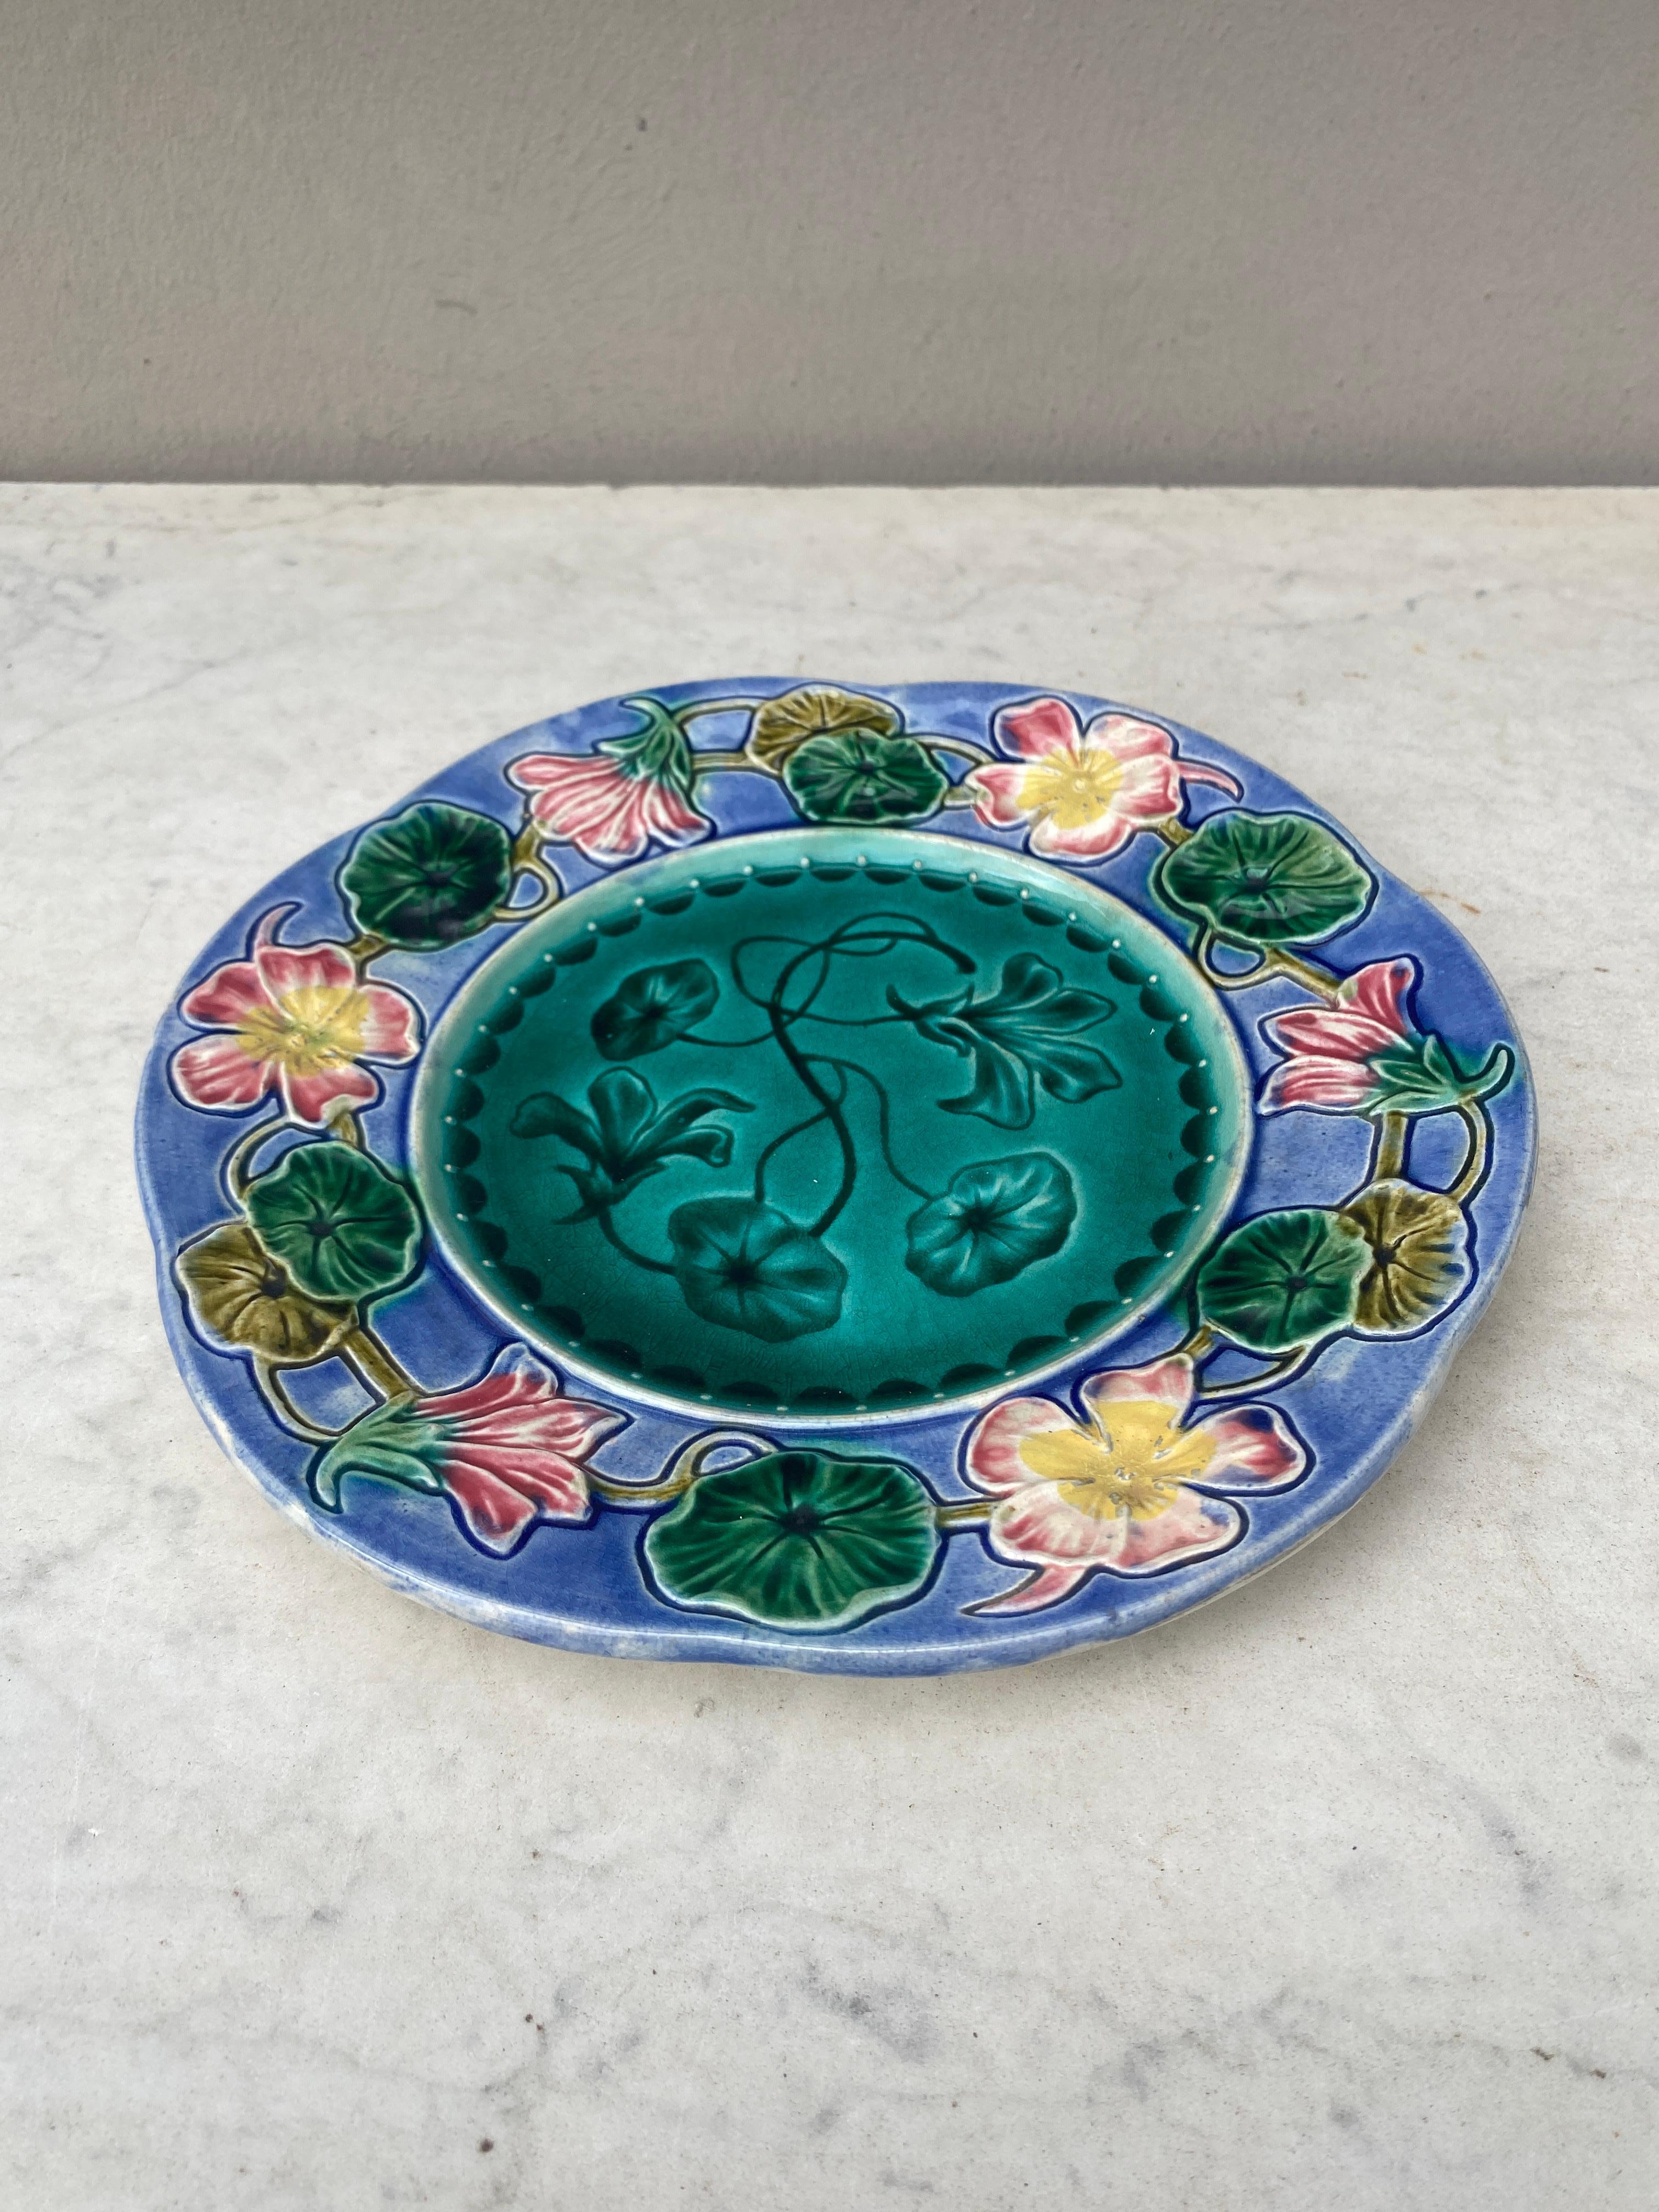 19th century French Majolica flowers plate.